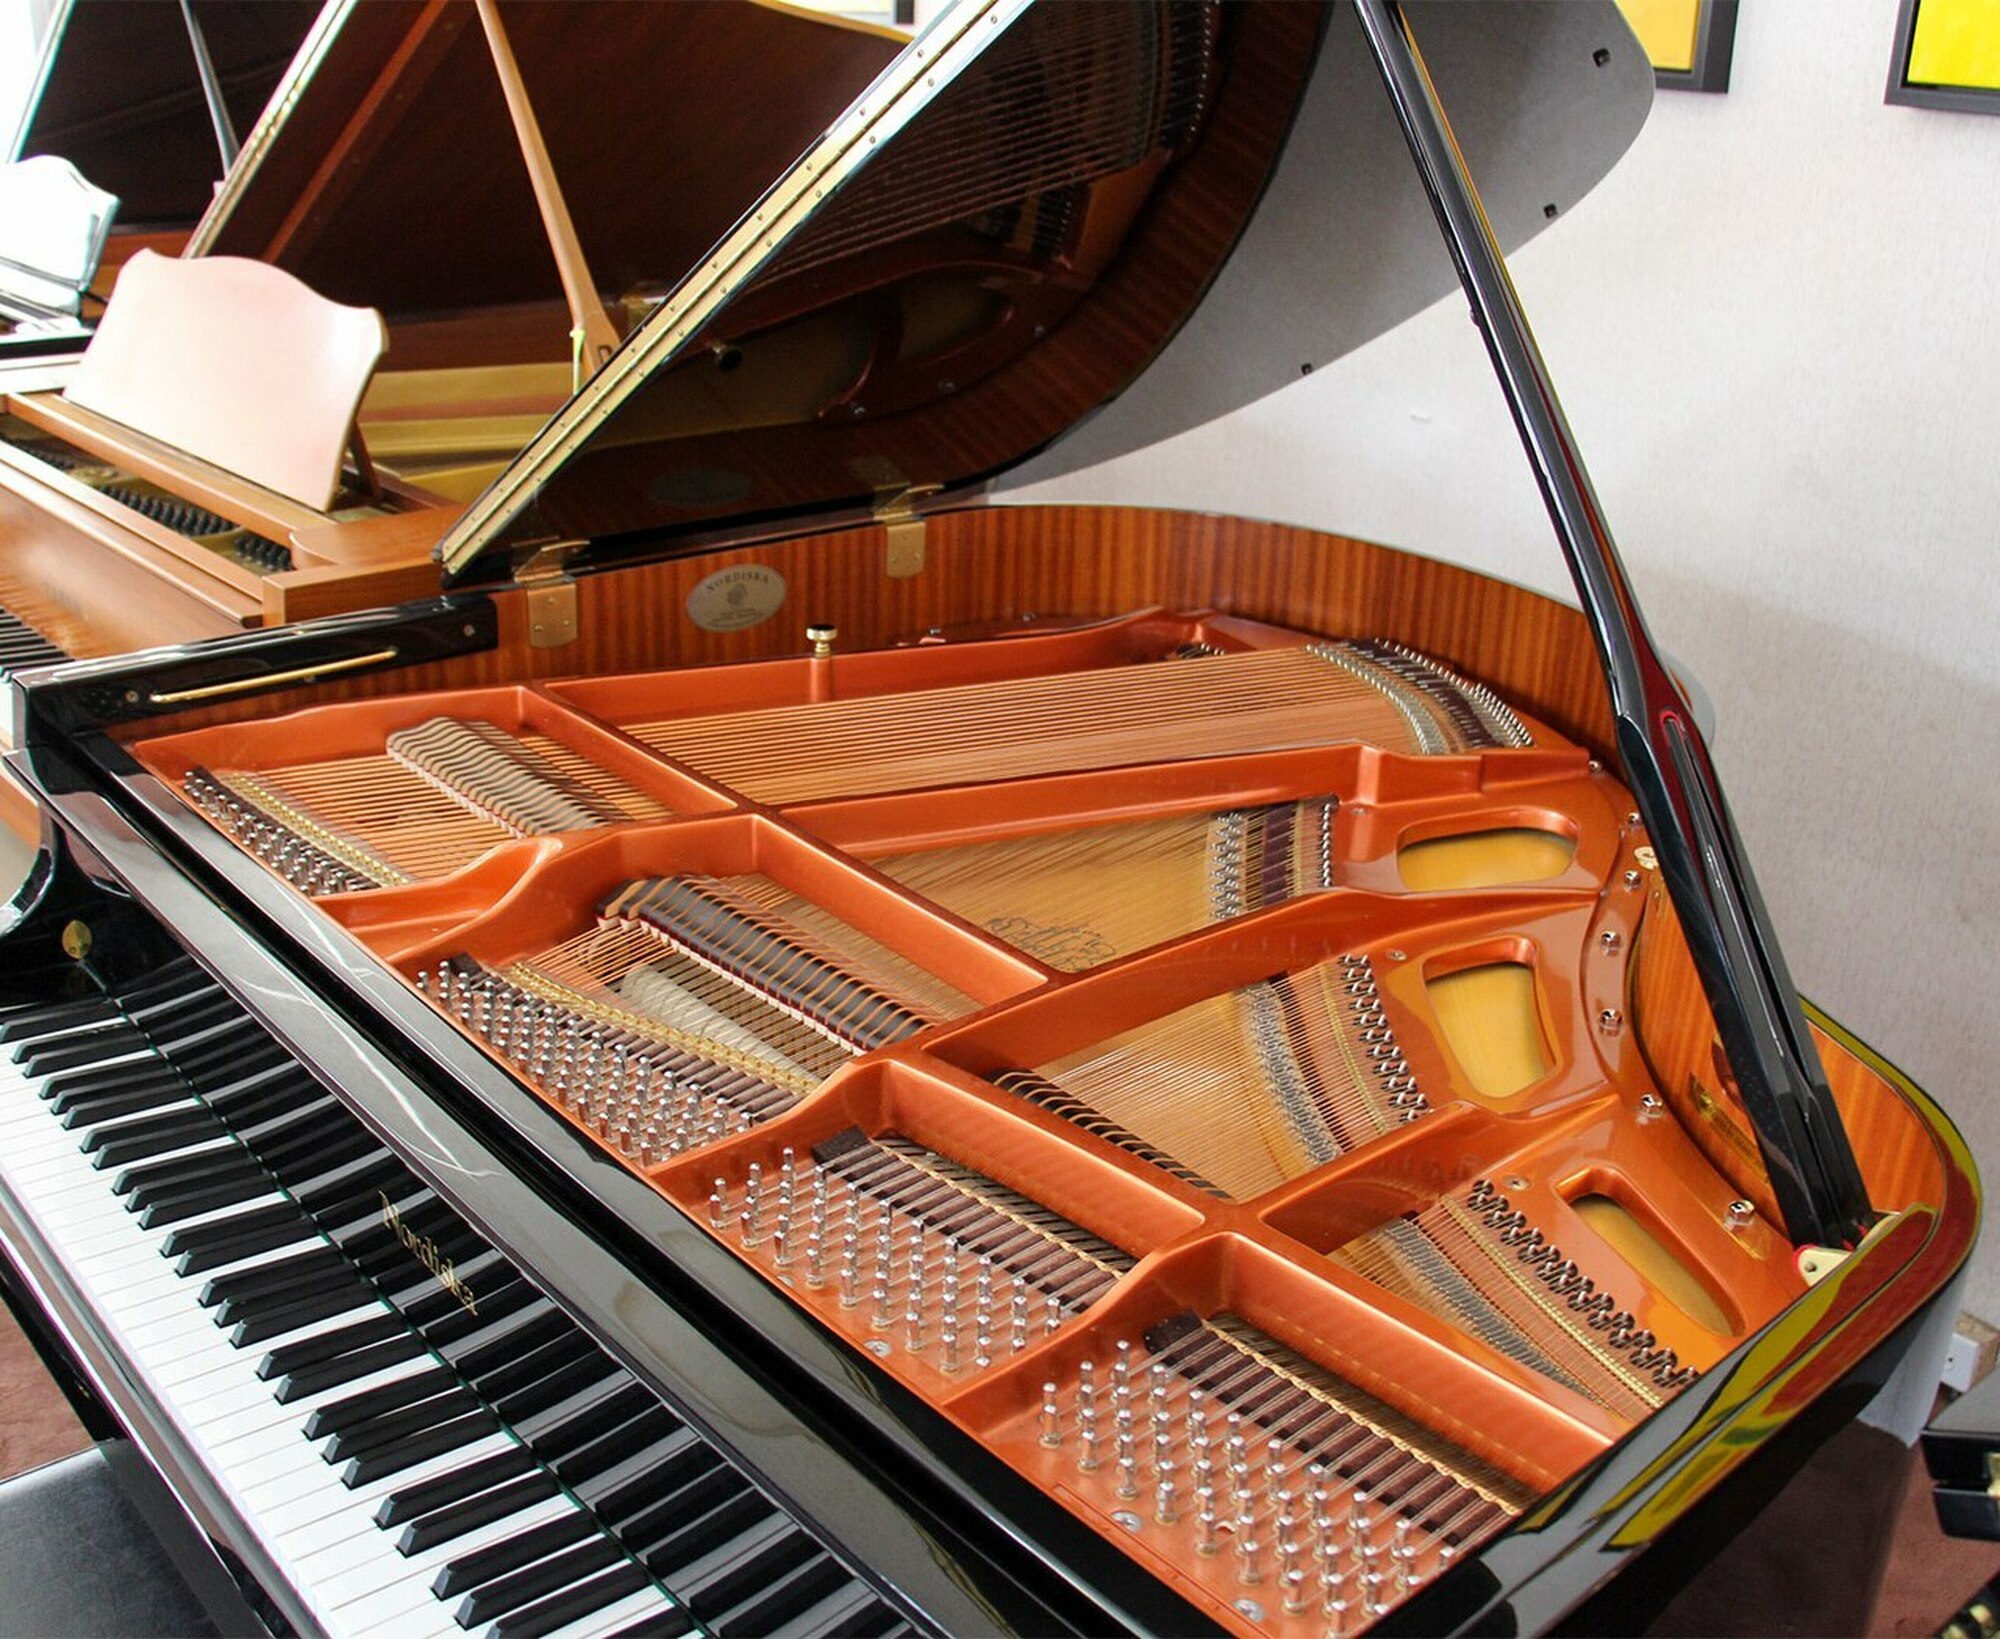 where is the model of nordiska piano located